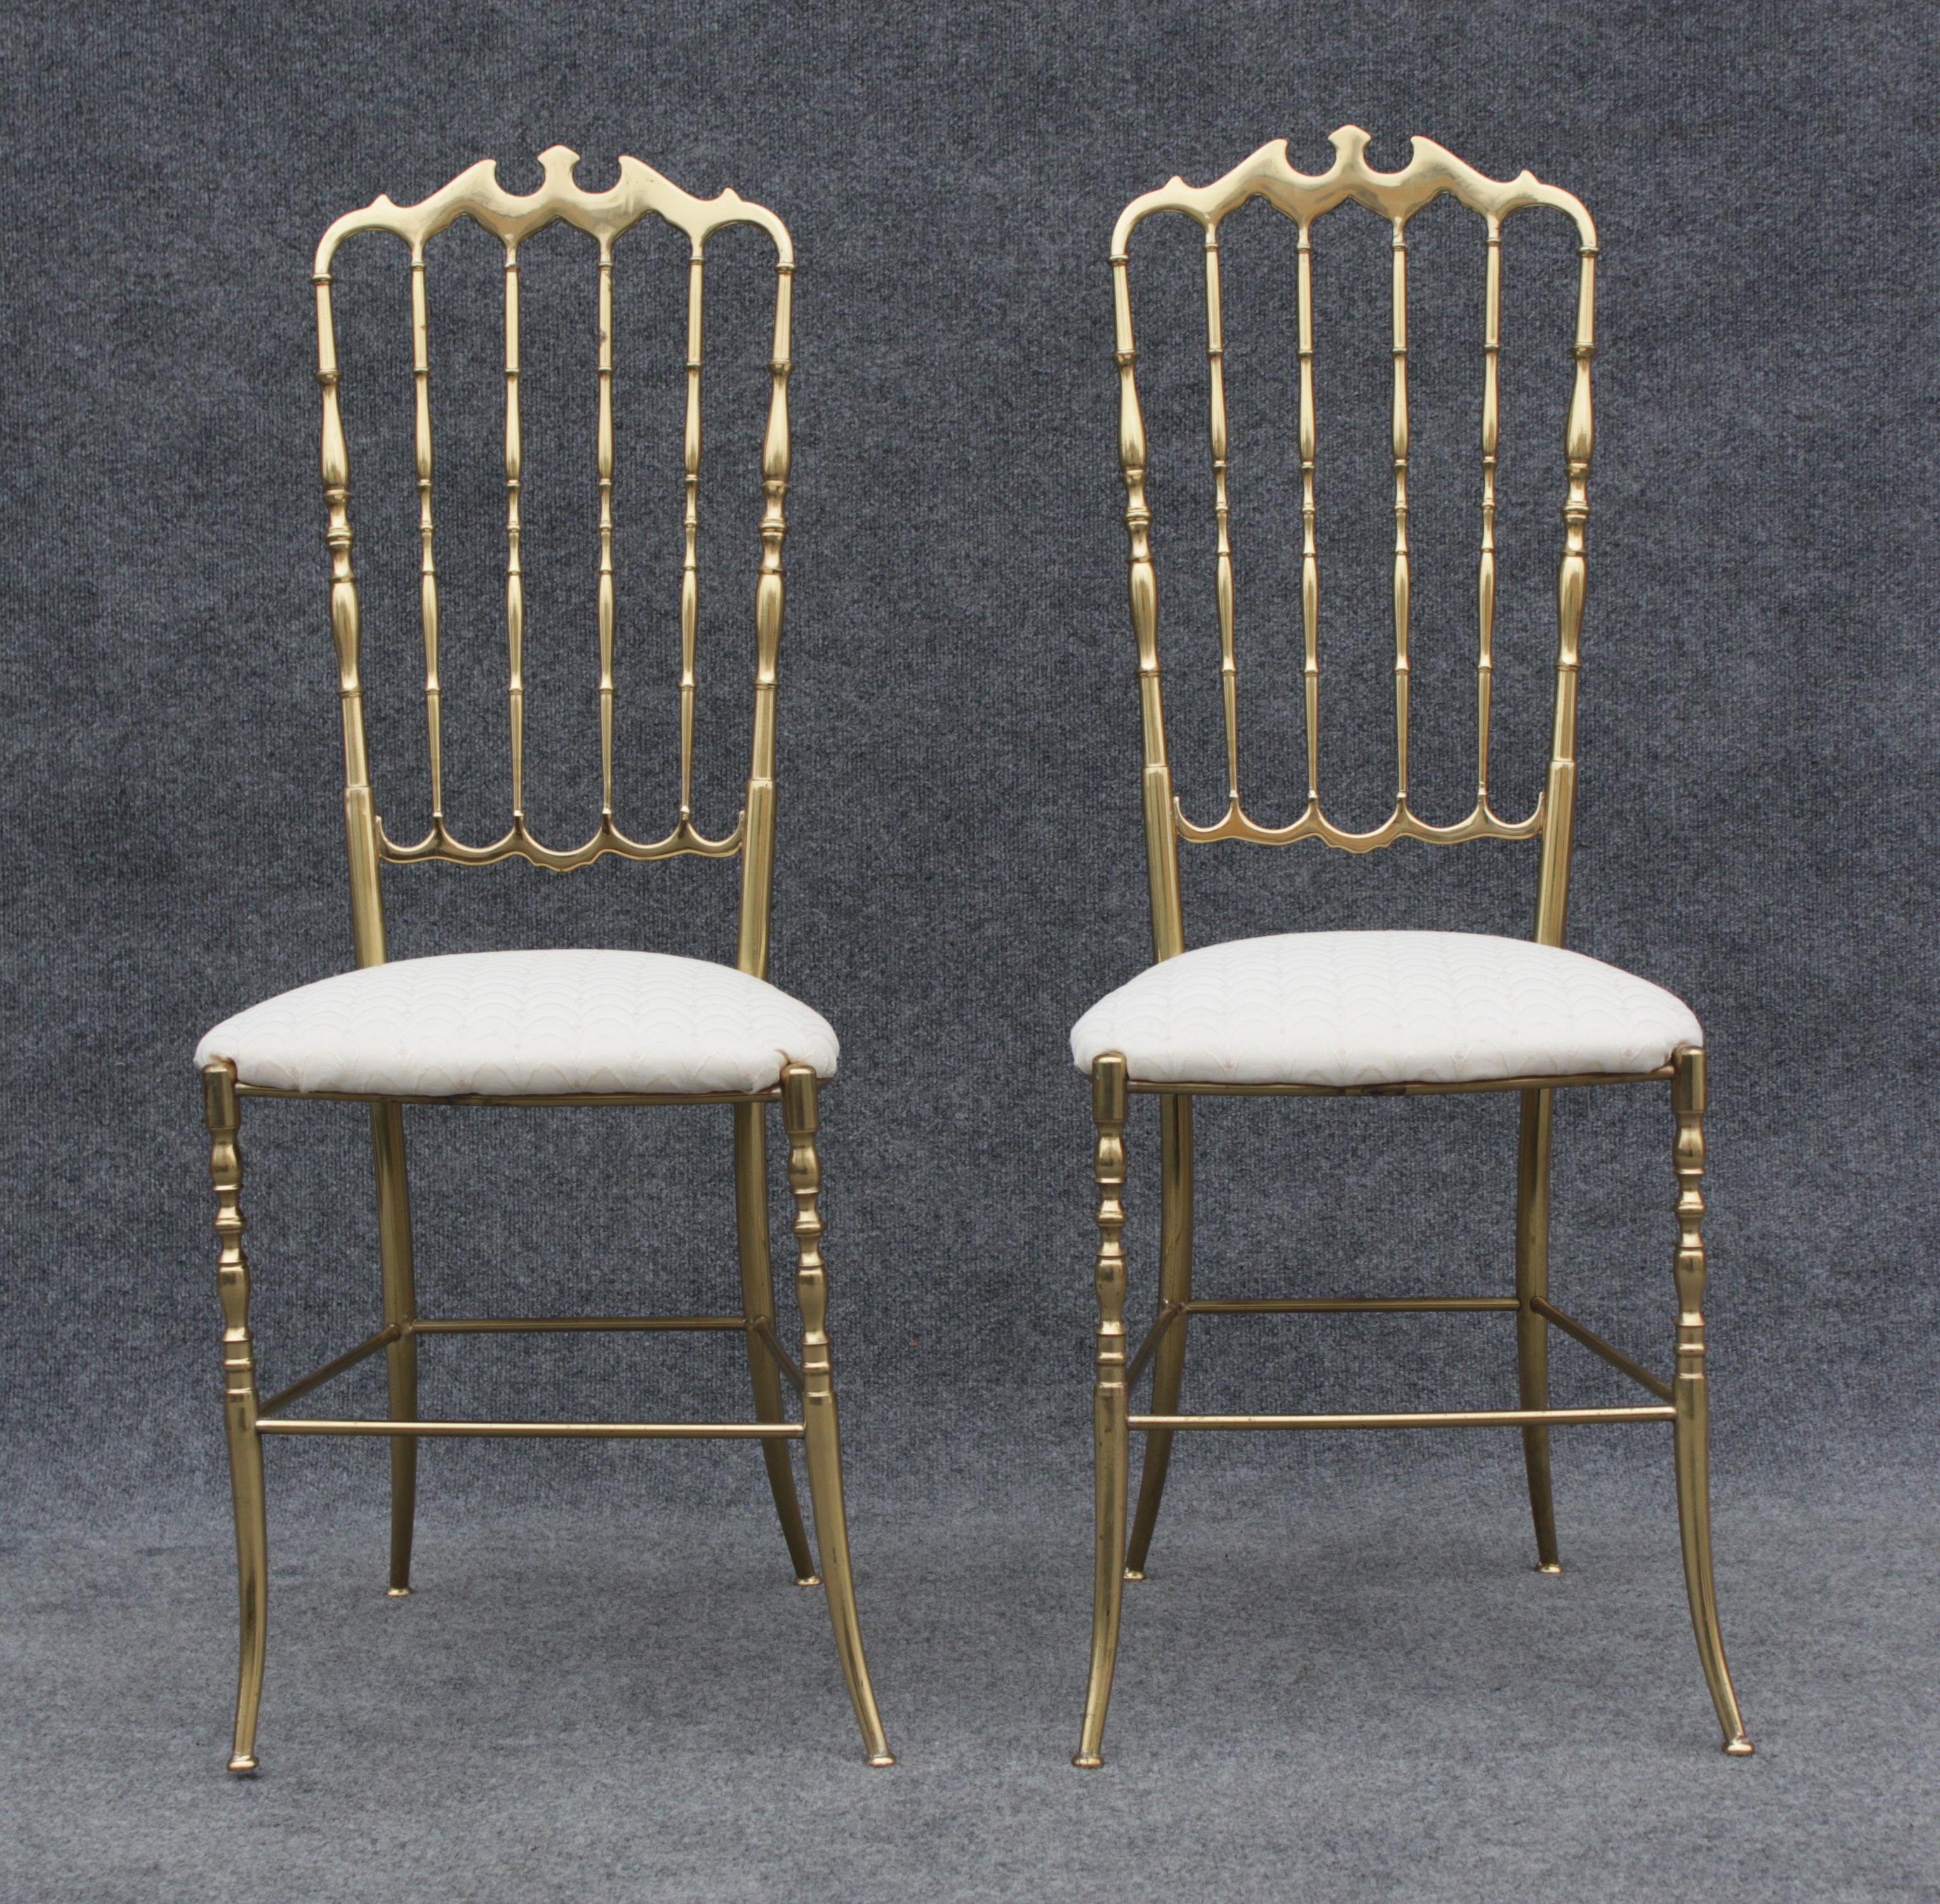 Designed in the early 1900s, these chairs were produced in the 1960s by Chiavari. Made in Italy, they feature excellent construction. With solid brass frames, they feature intricate details all over the back and legs. The back is a series of posts